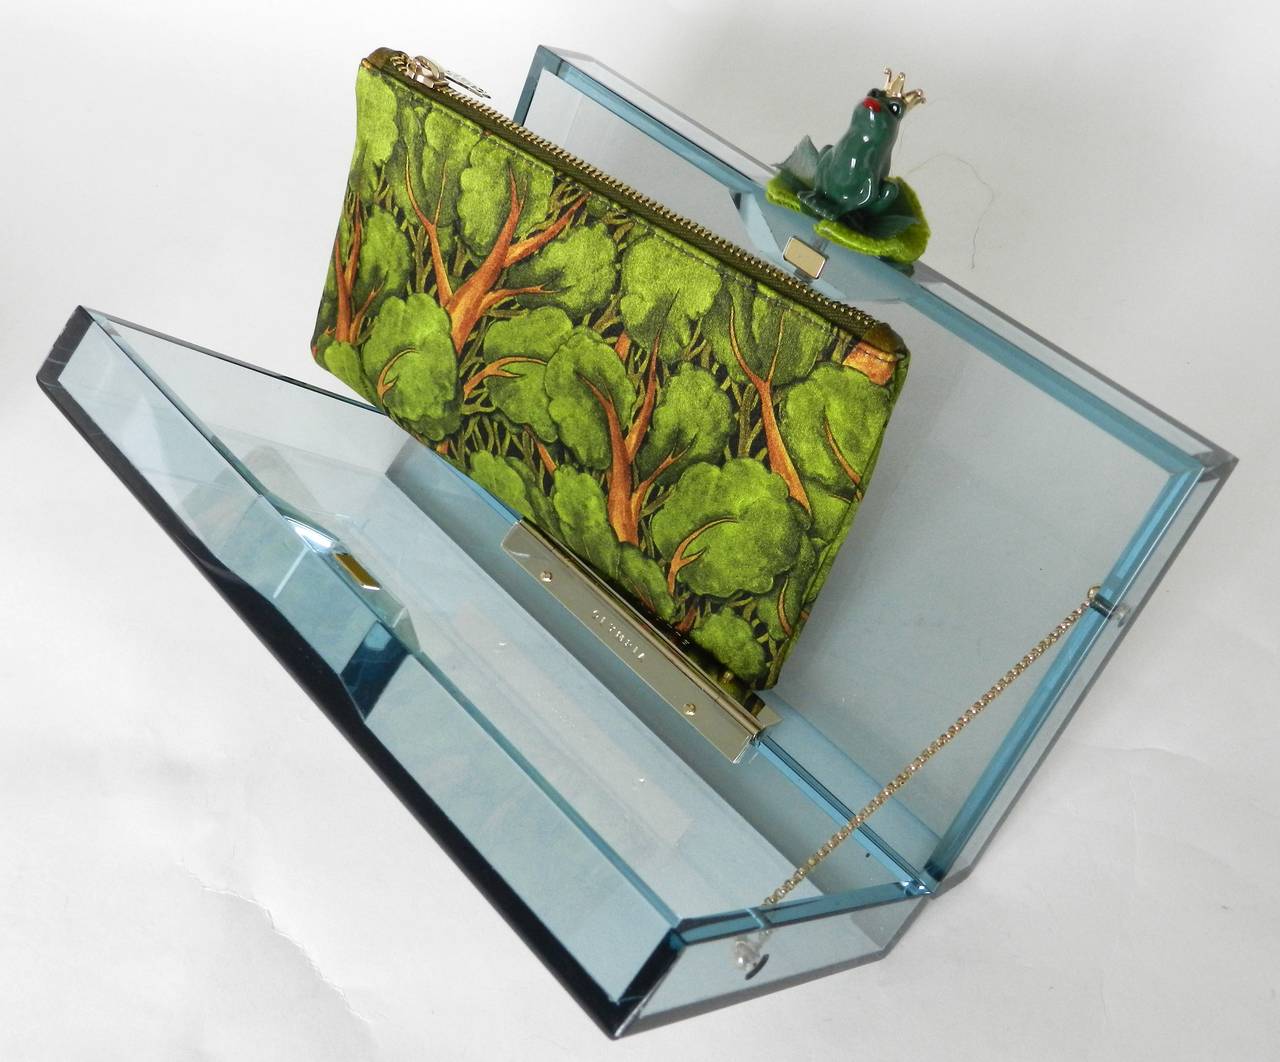 Charlotte Olympia frog prince pandora perspex clutch bag. Transparent blue acrylic body with green enamel frog clasp, green forest zipper fabric insert, magnetic closure. Original box, unused. Body measures 7.5 x 4.25 x 1.75